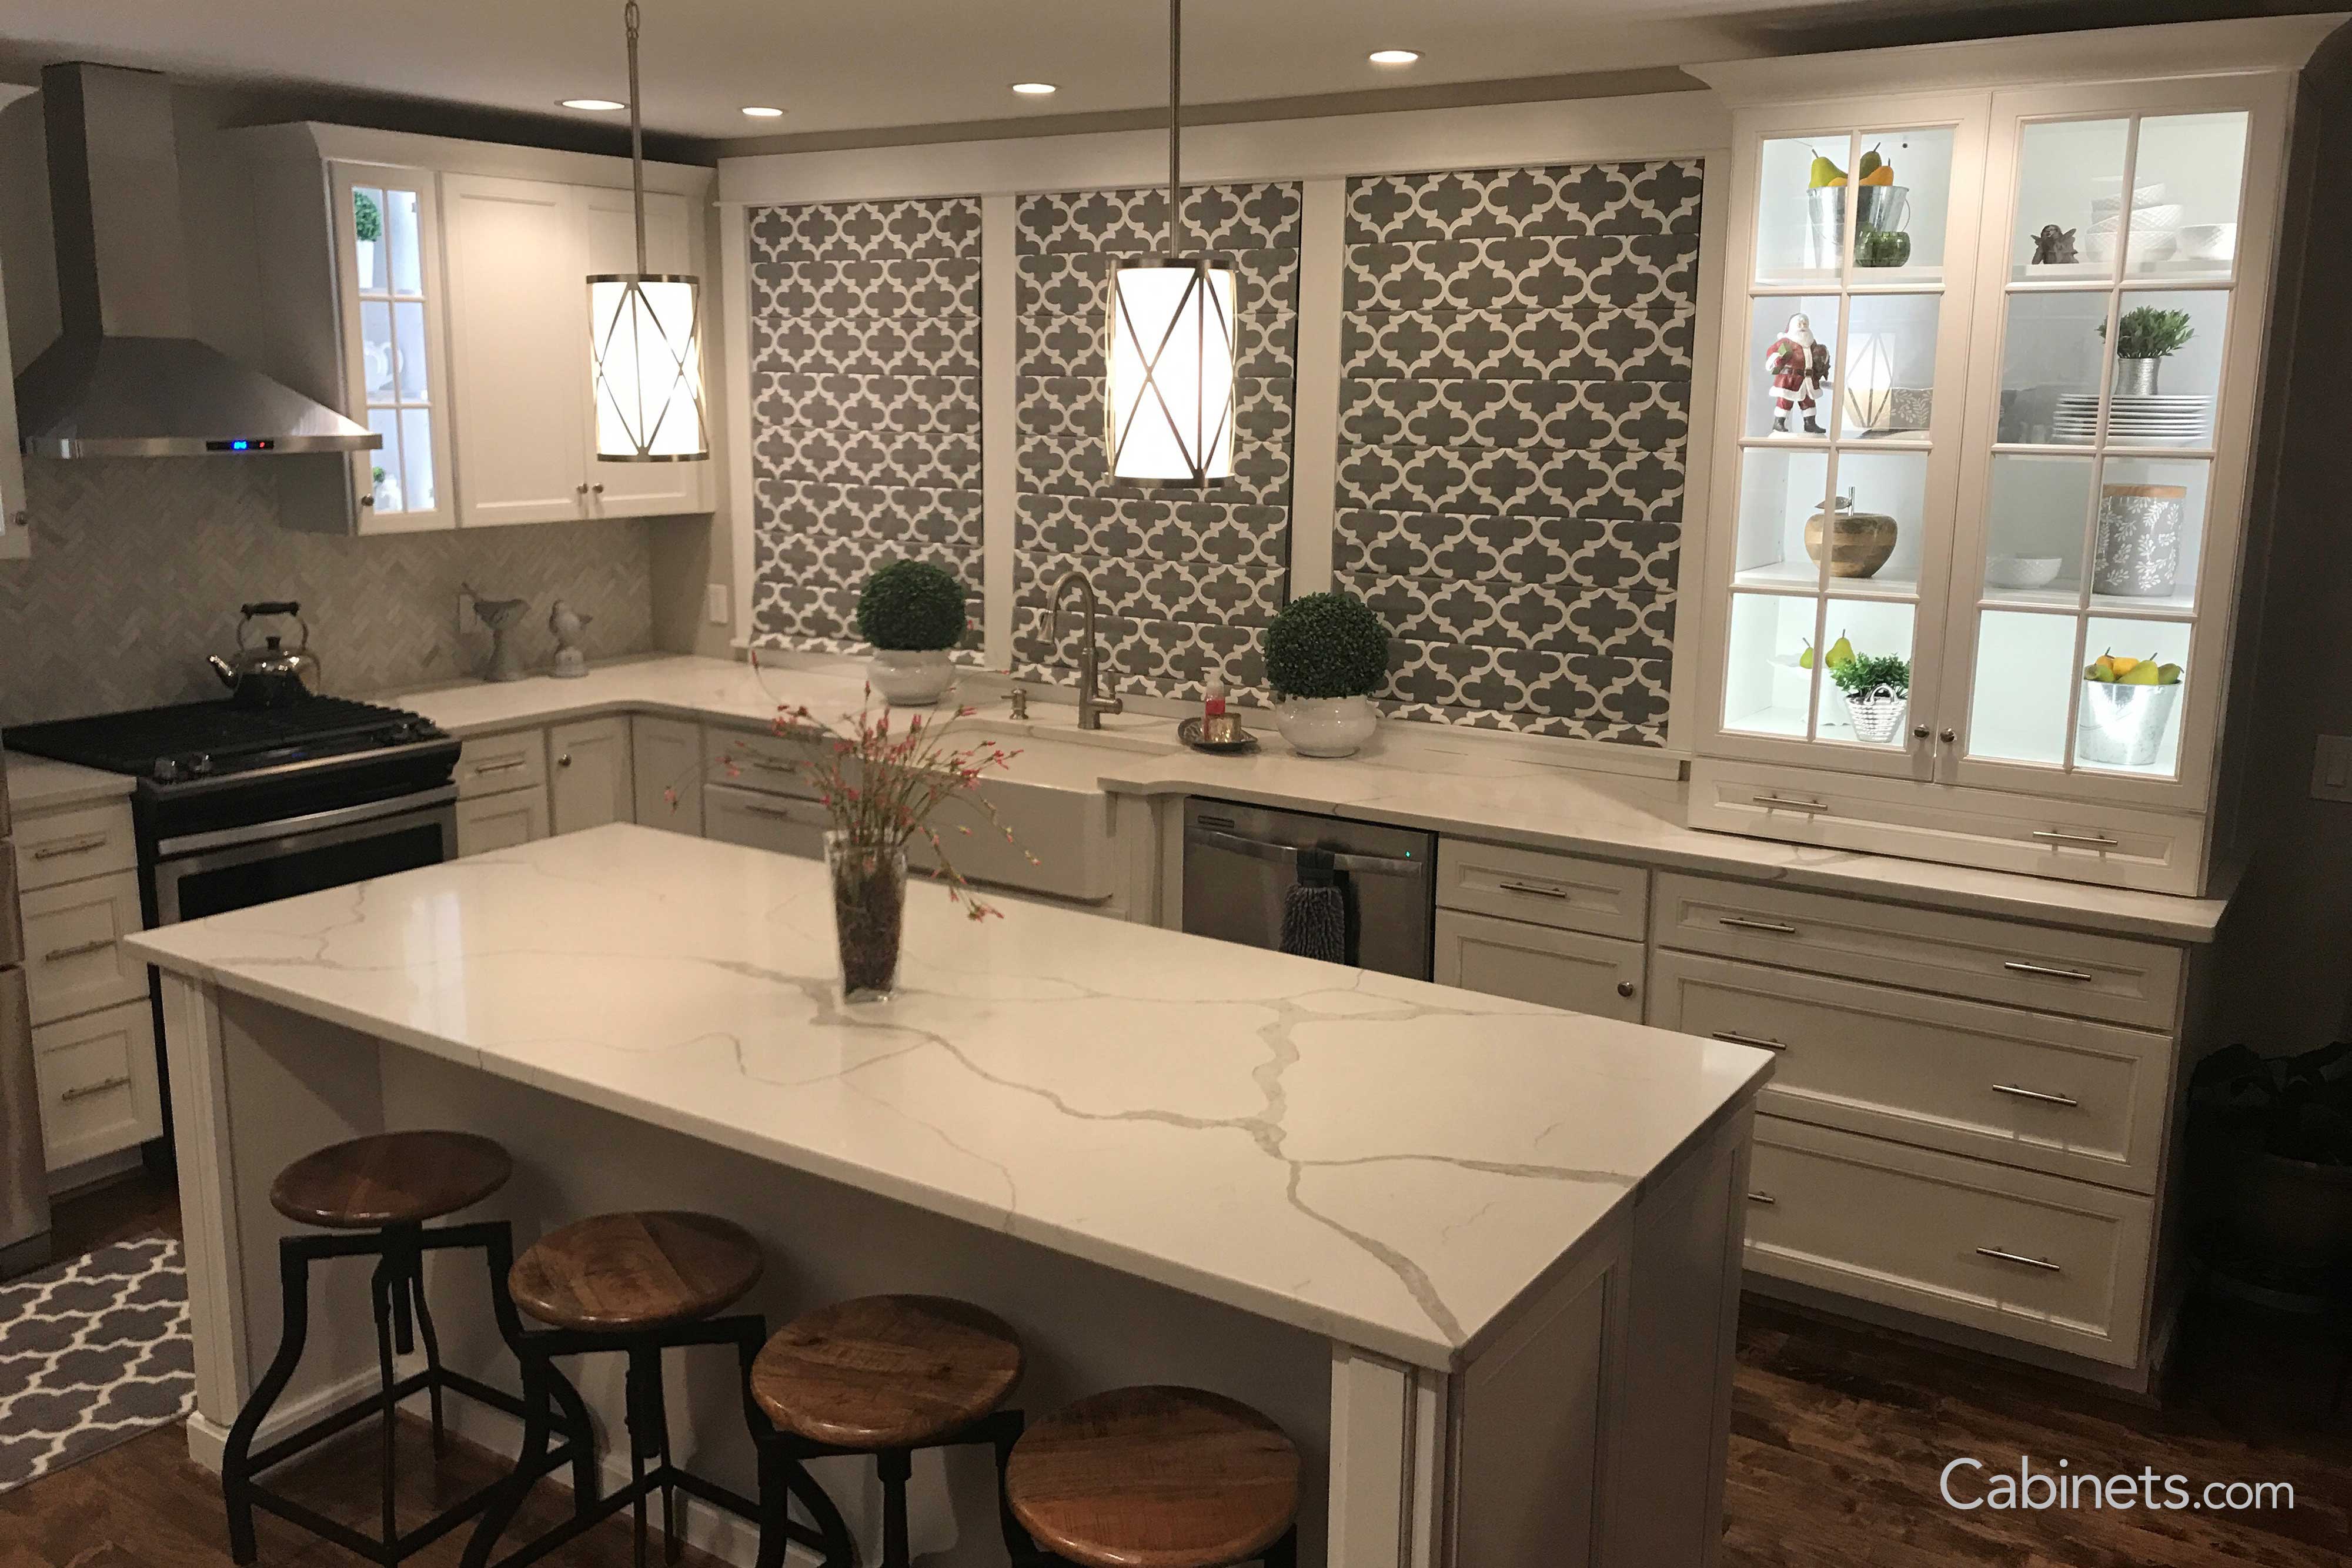 Belleair Maple Alabaster kitchen cabinets with white marble counter tops